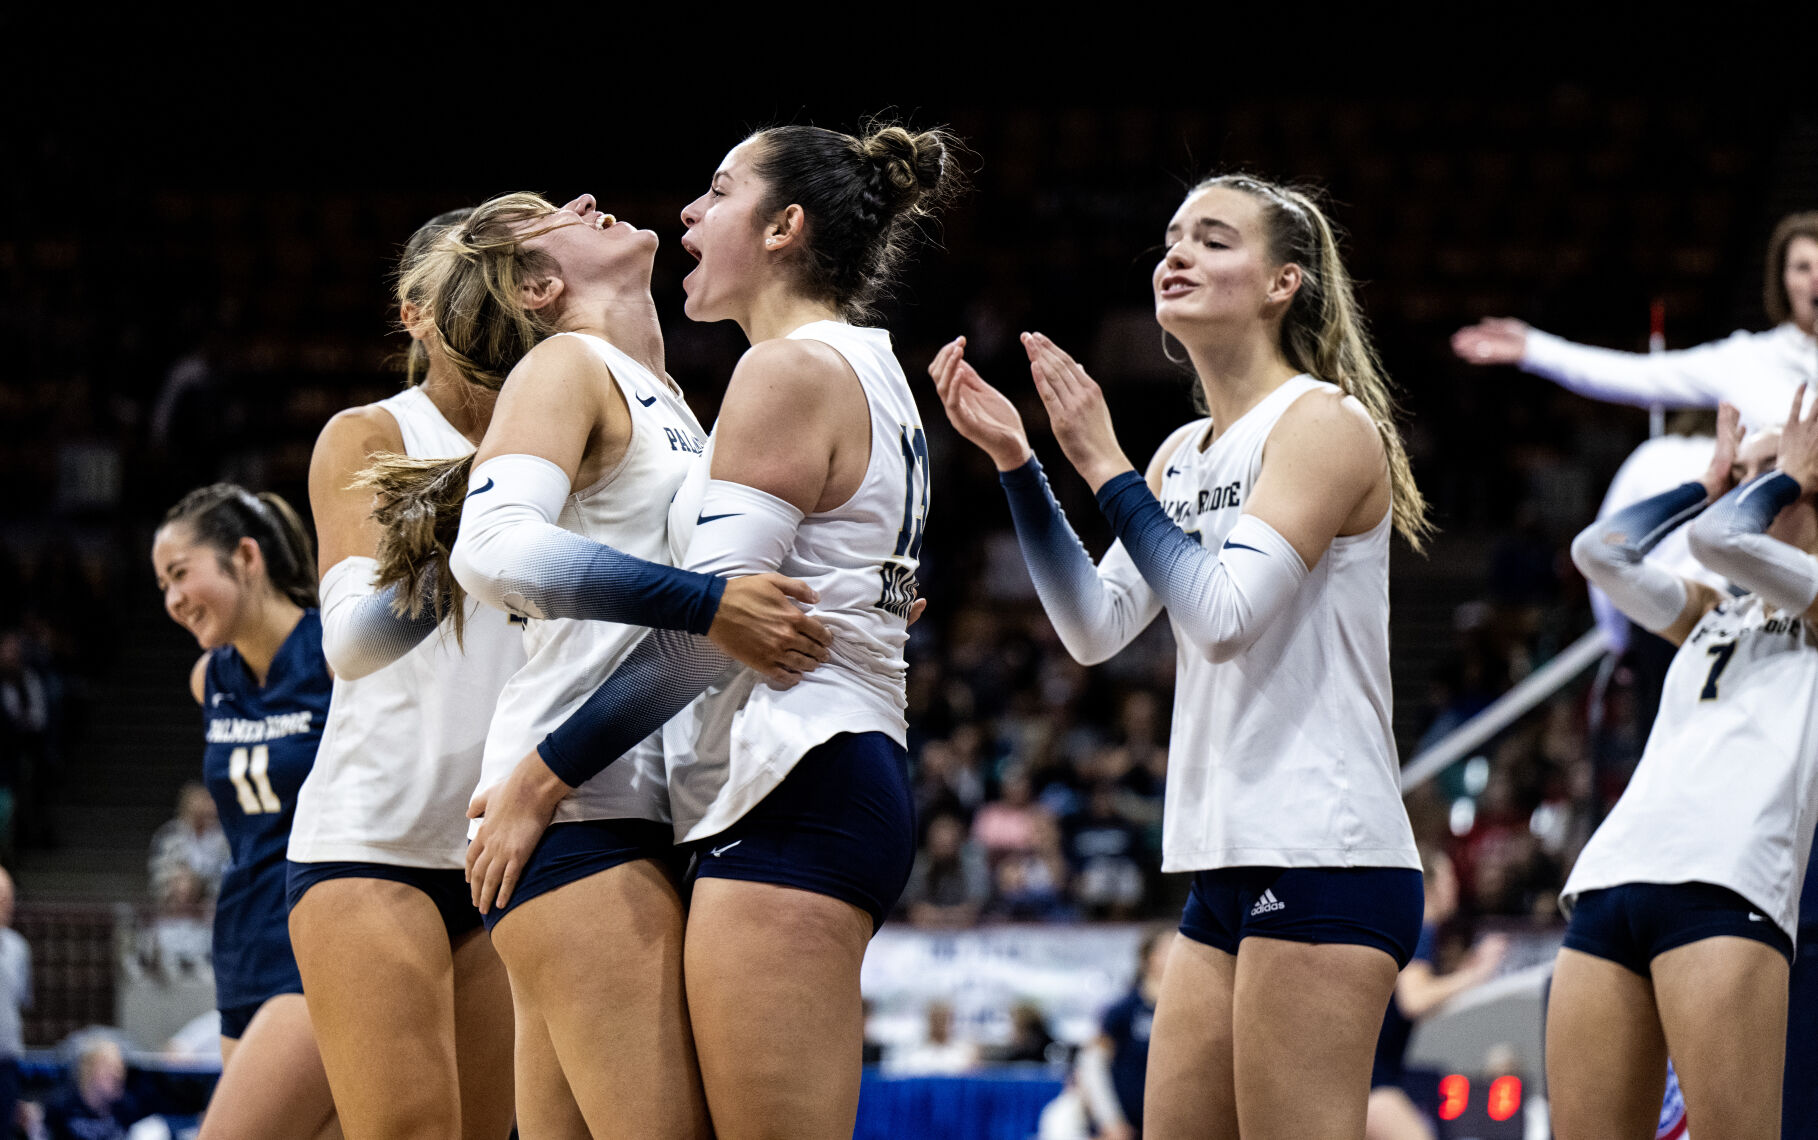 Palmer Ridge Volleyball Clinches 4A State Title in Five-Set Thriller